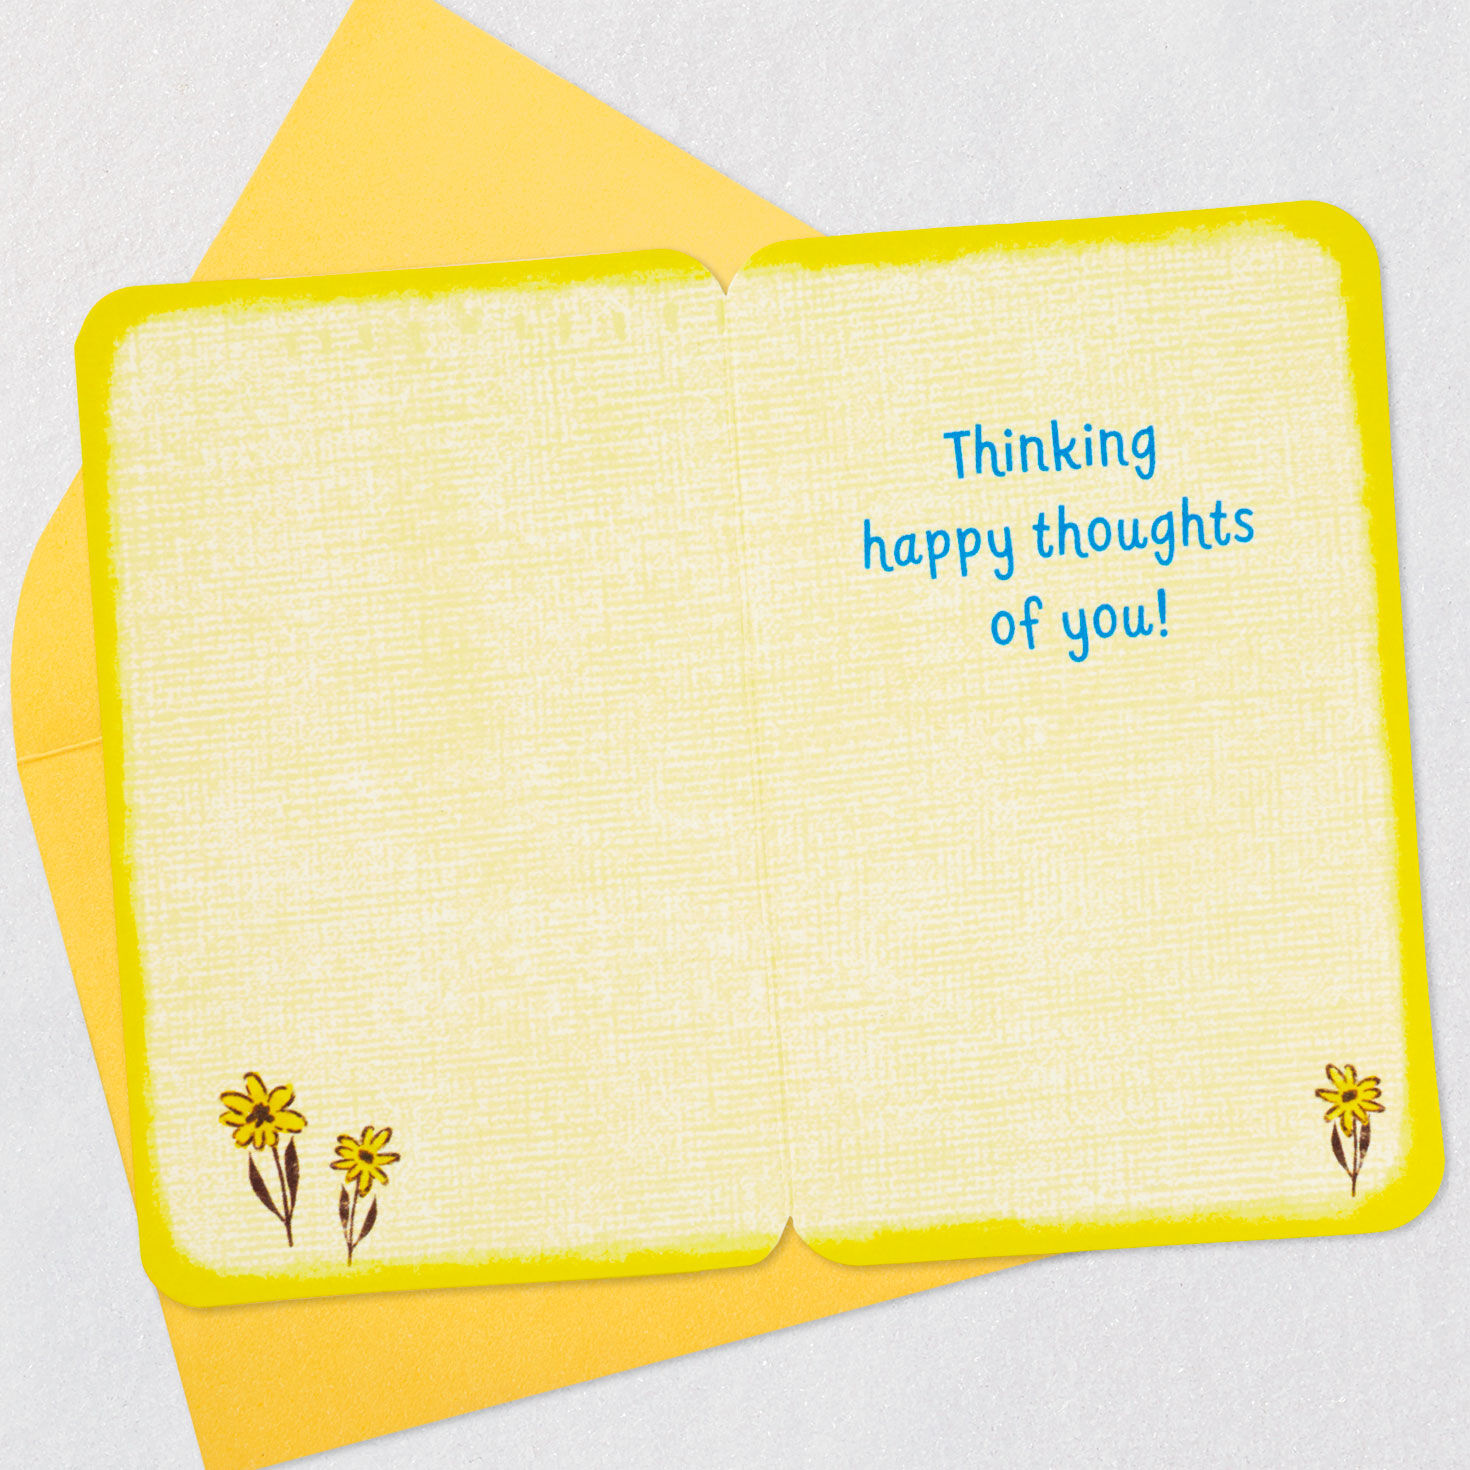 3.25" Mini Disney Winnie the Pooh Thinking of You Card for only USD 1.99 | Hallmark